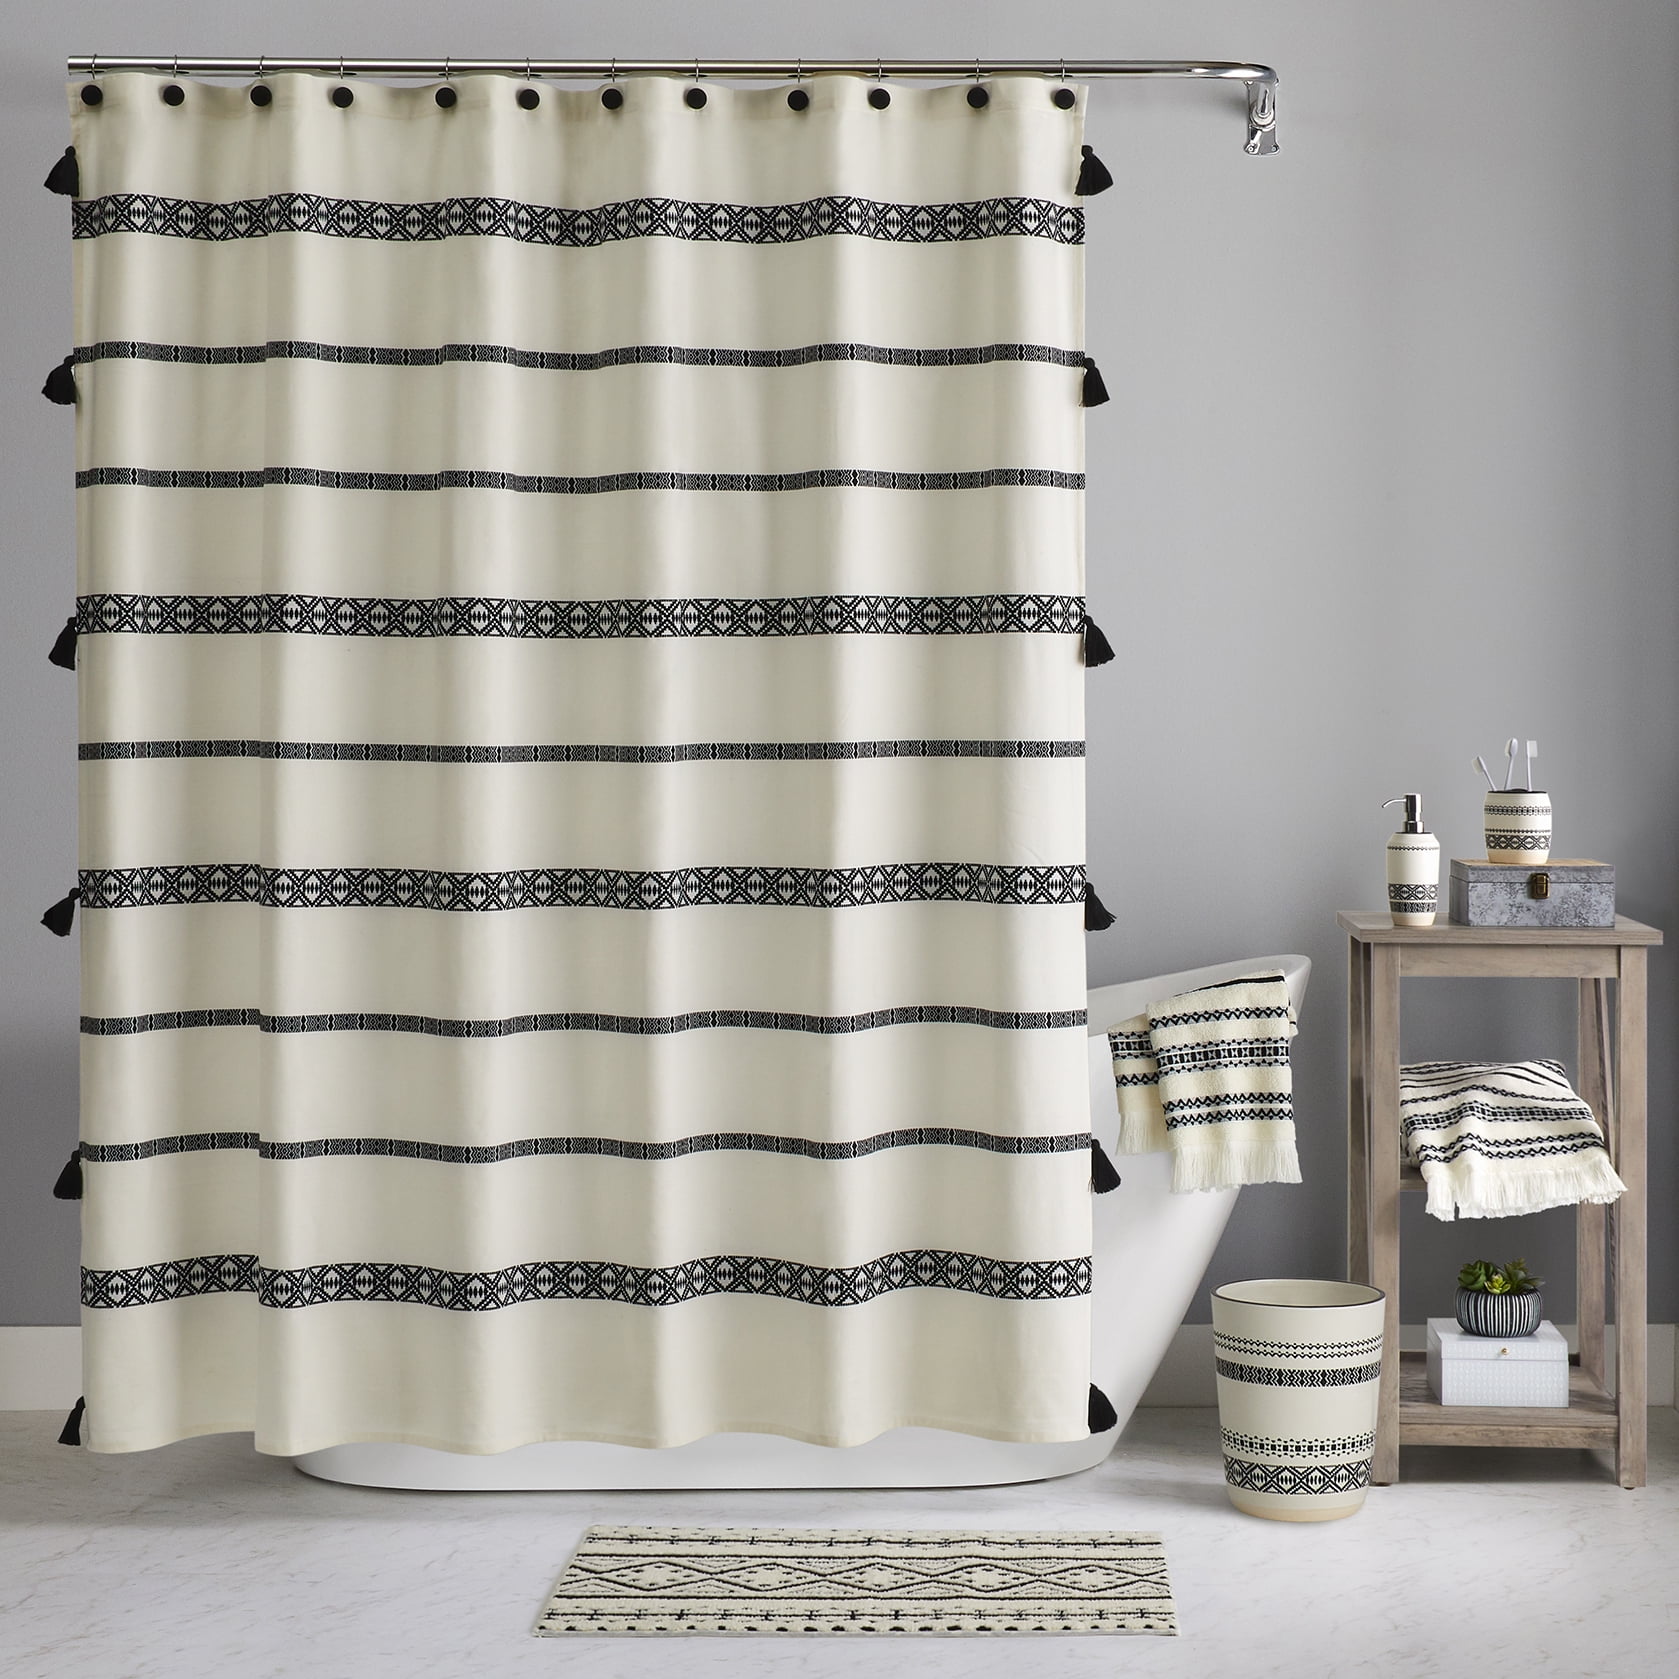 Black White Art Geometric Pattern Abstract Shower Curtain Set for